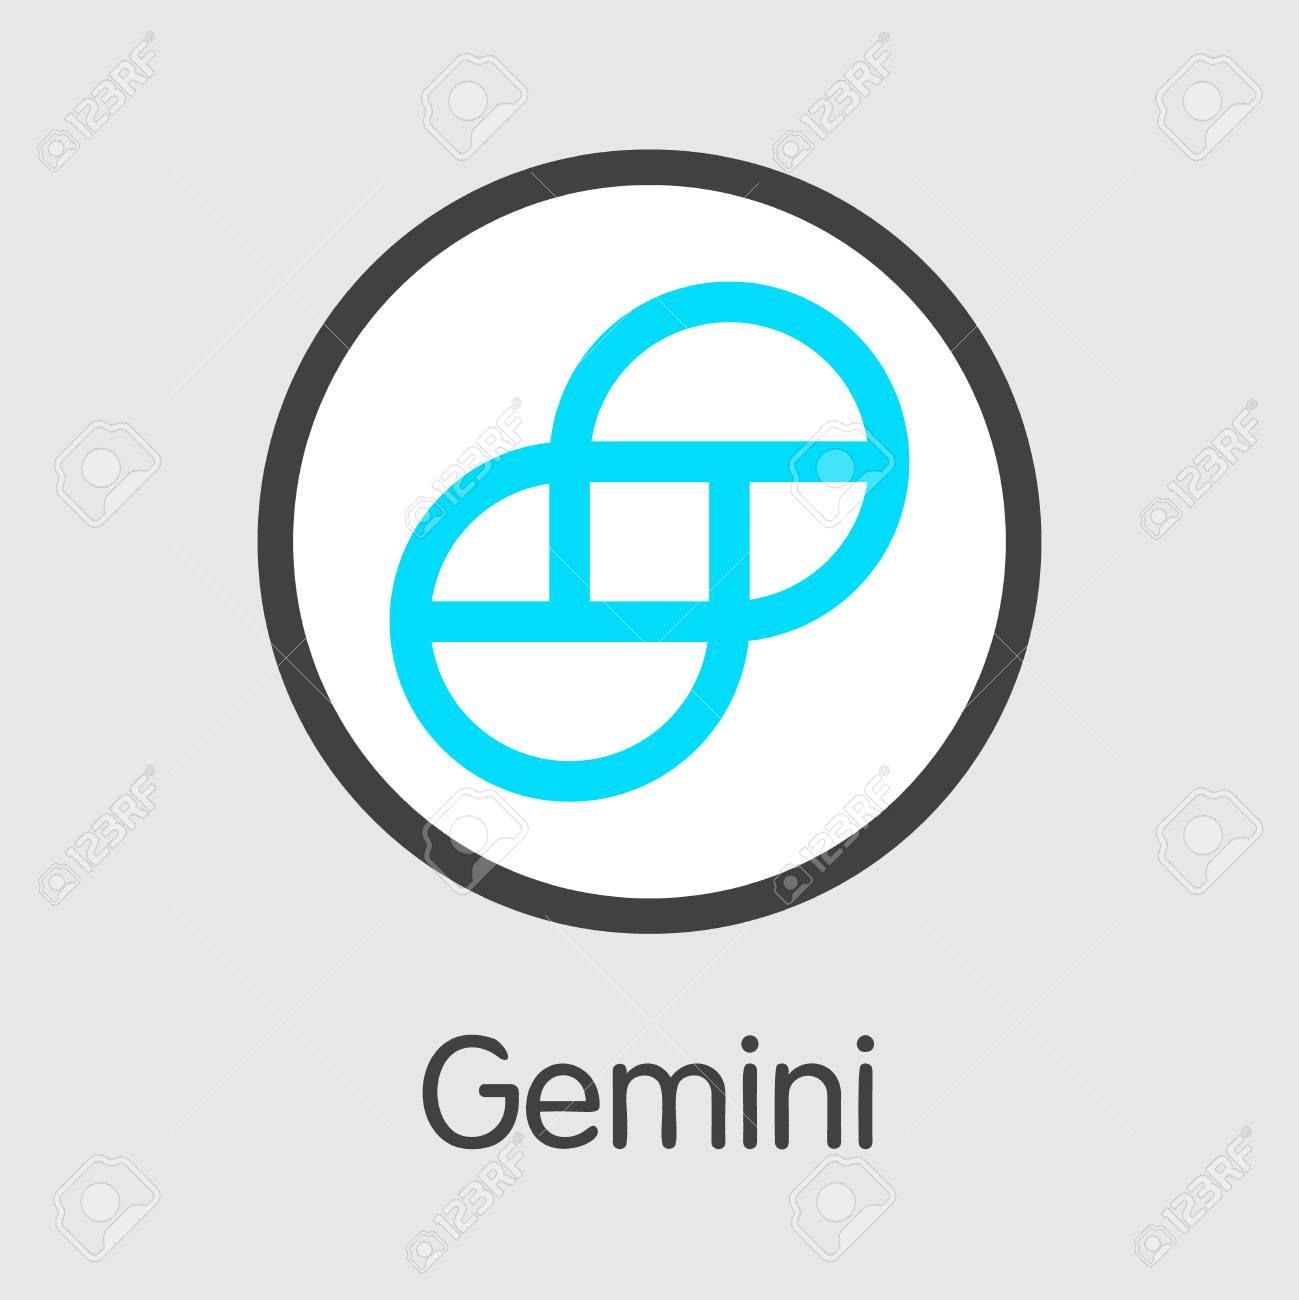 Gemini Exchange: Definition, History, Products & Services